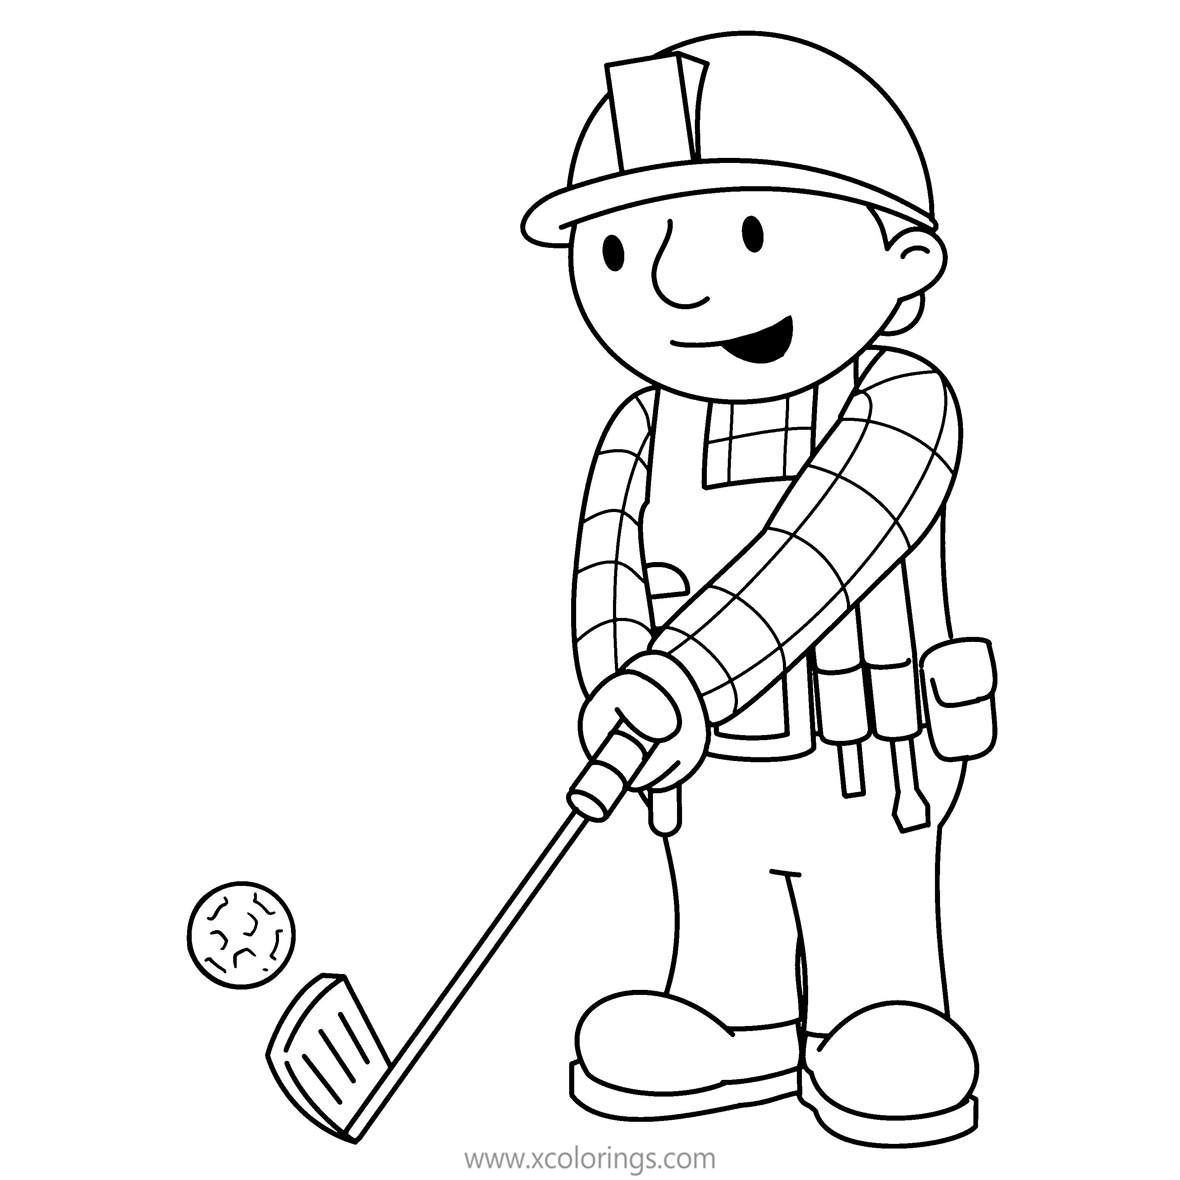 Free Bob The Builder Coloring Pages Play Golf printable